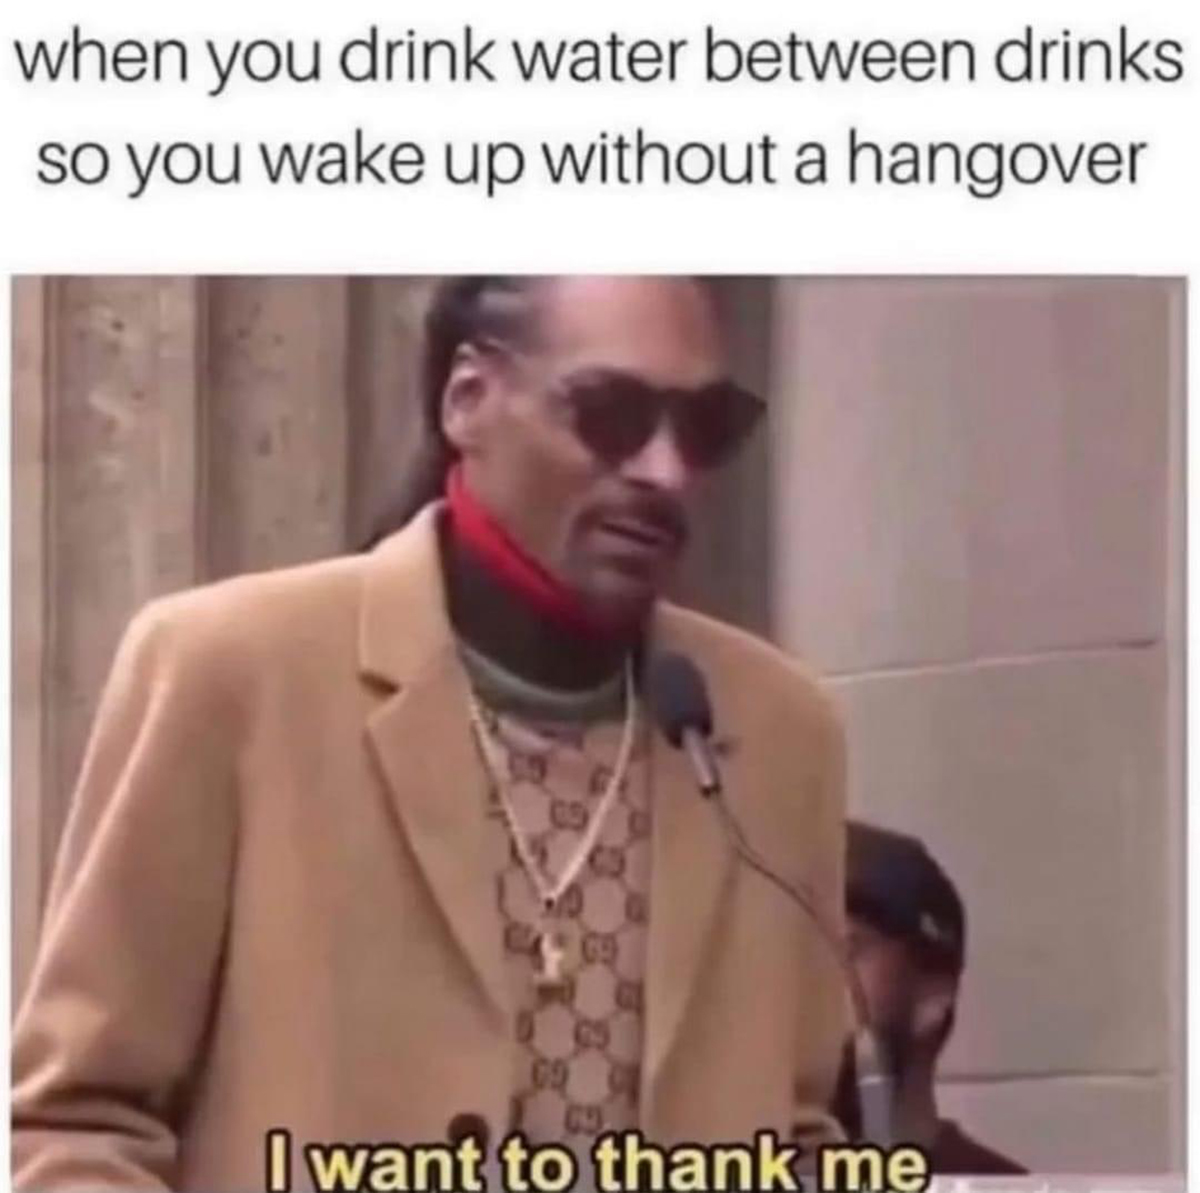 fresh memes - funny hangover meme - when you drink water between drinks so you wake up without a hangover I want to thank me